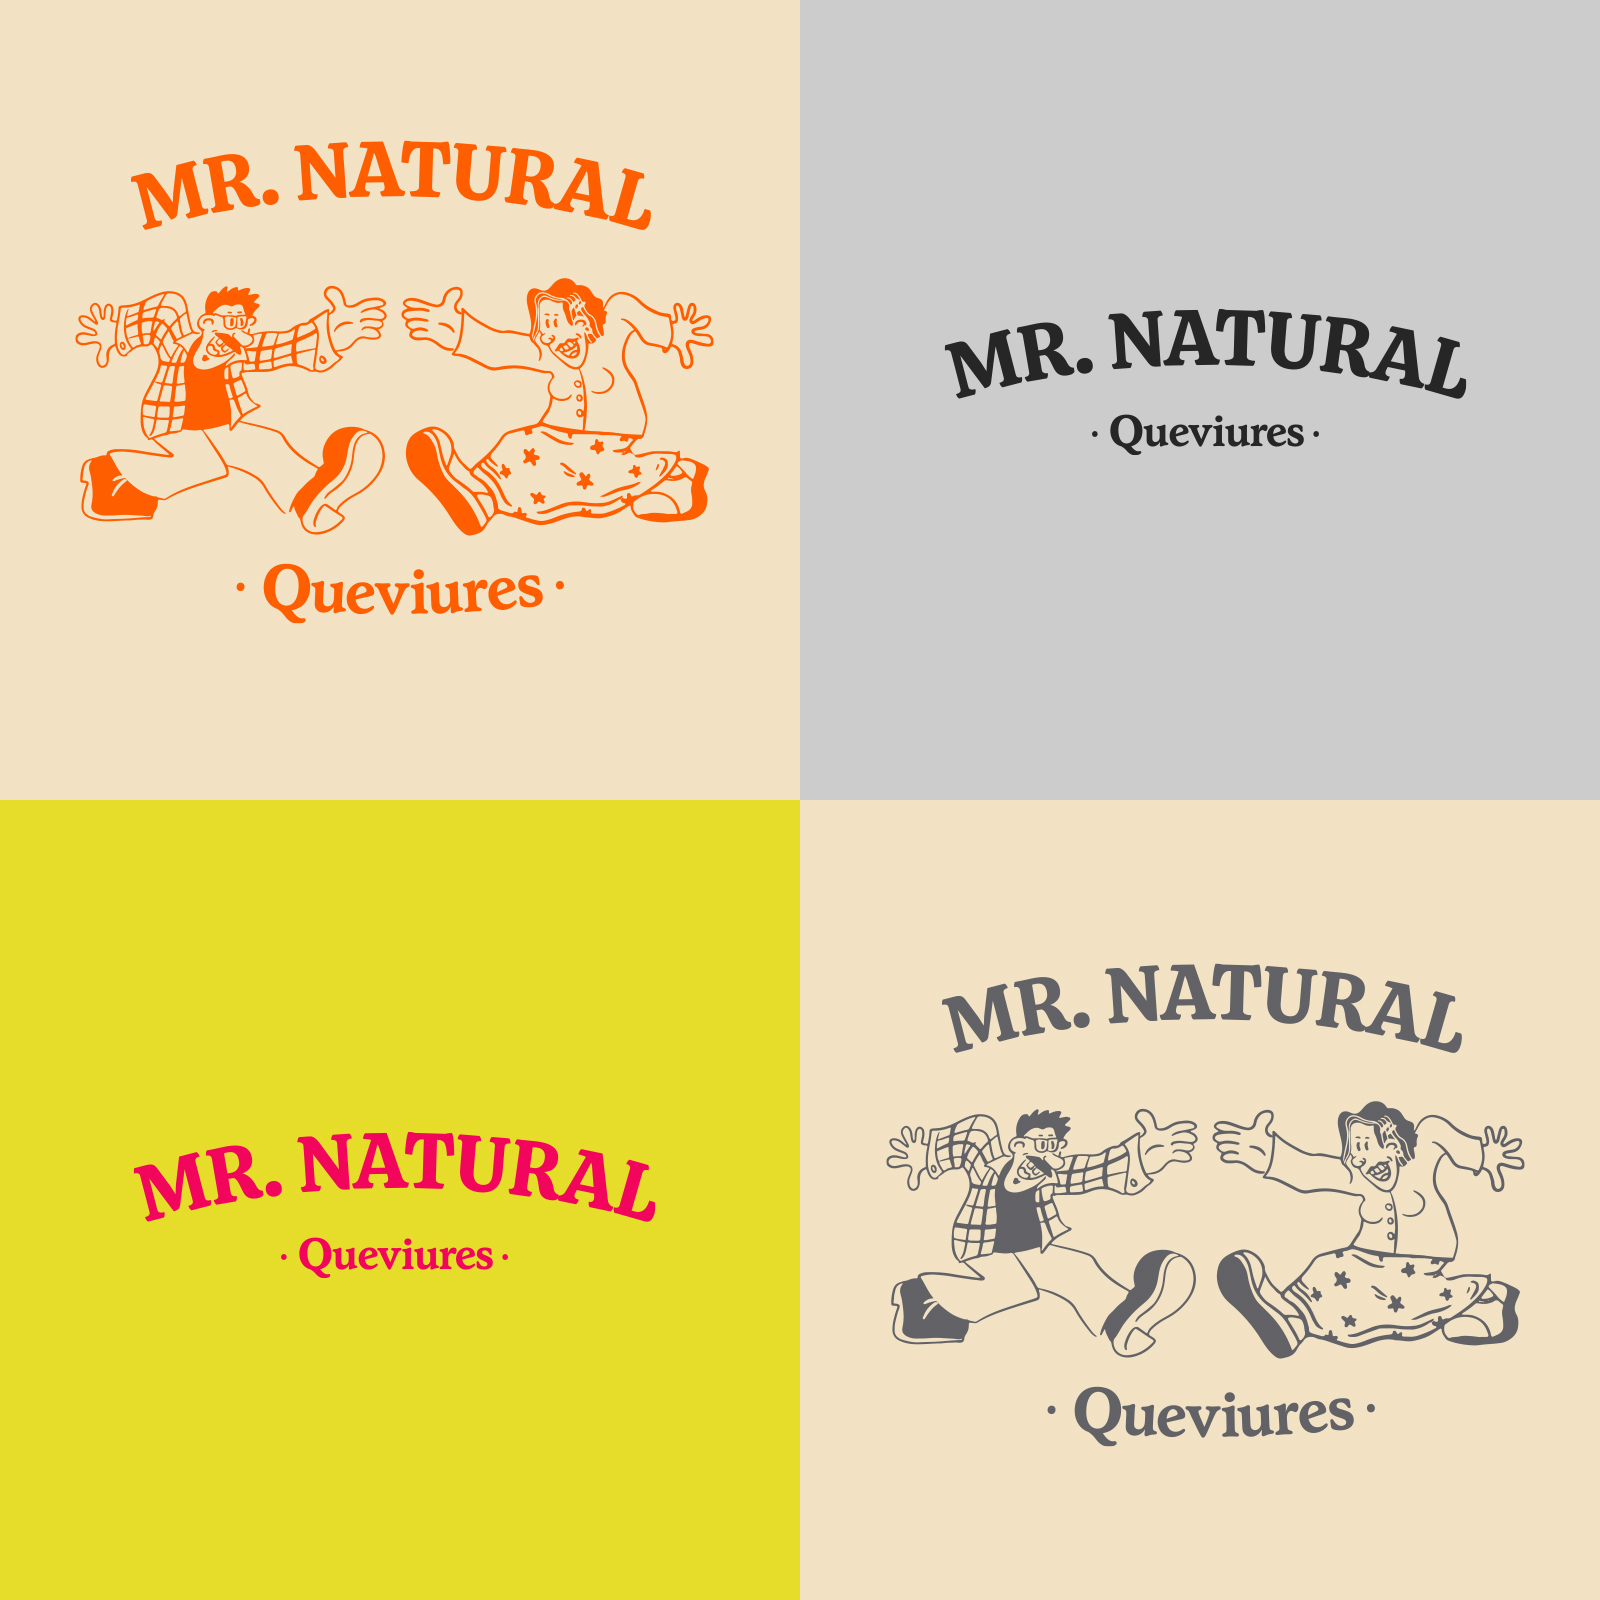 Mister Natural by Limón studio - Creative Work